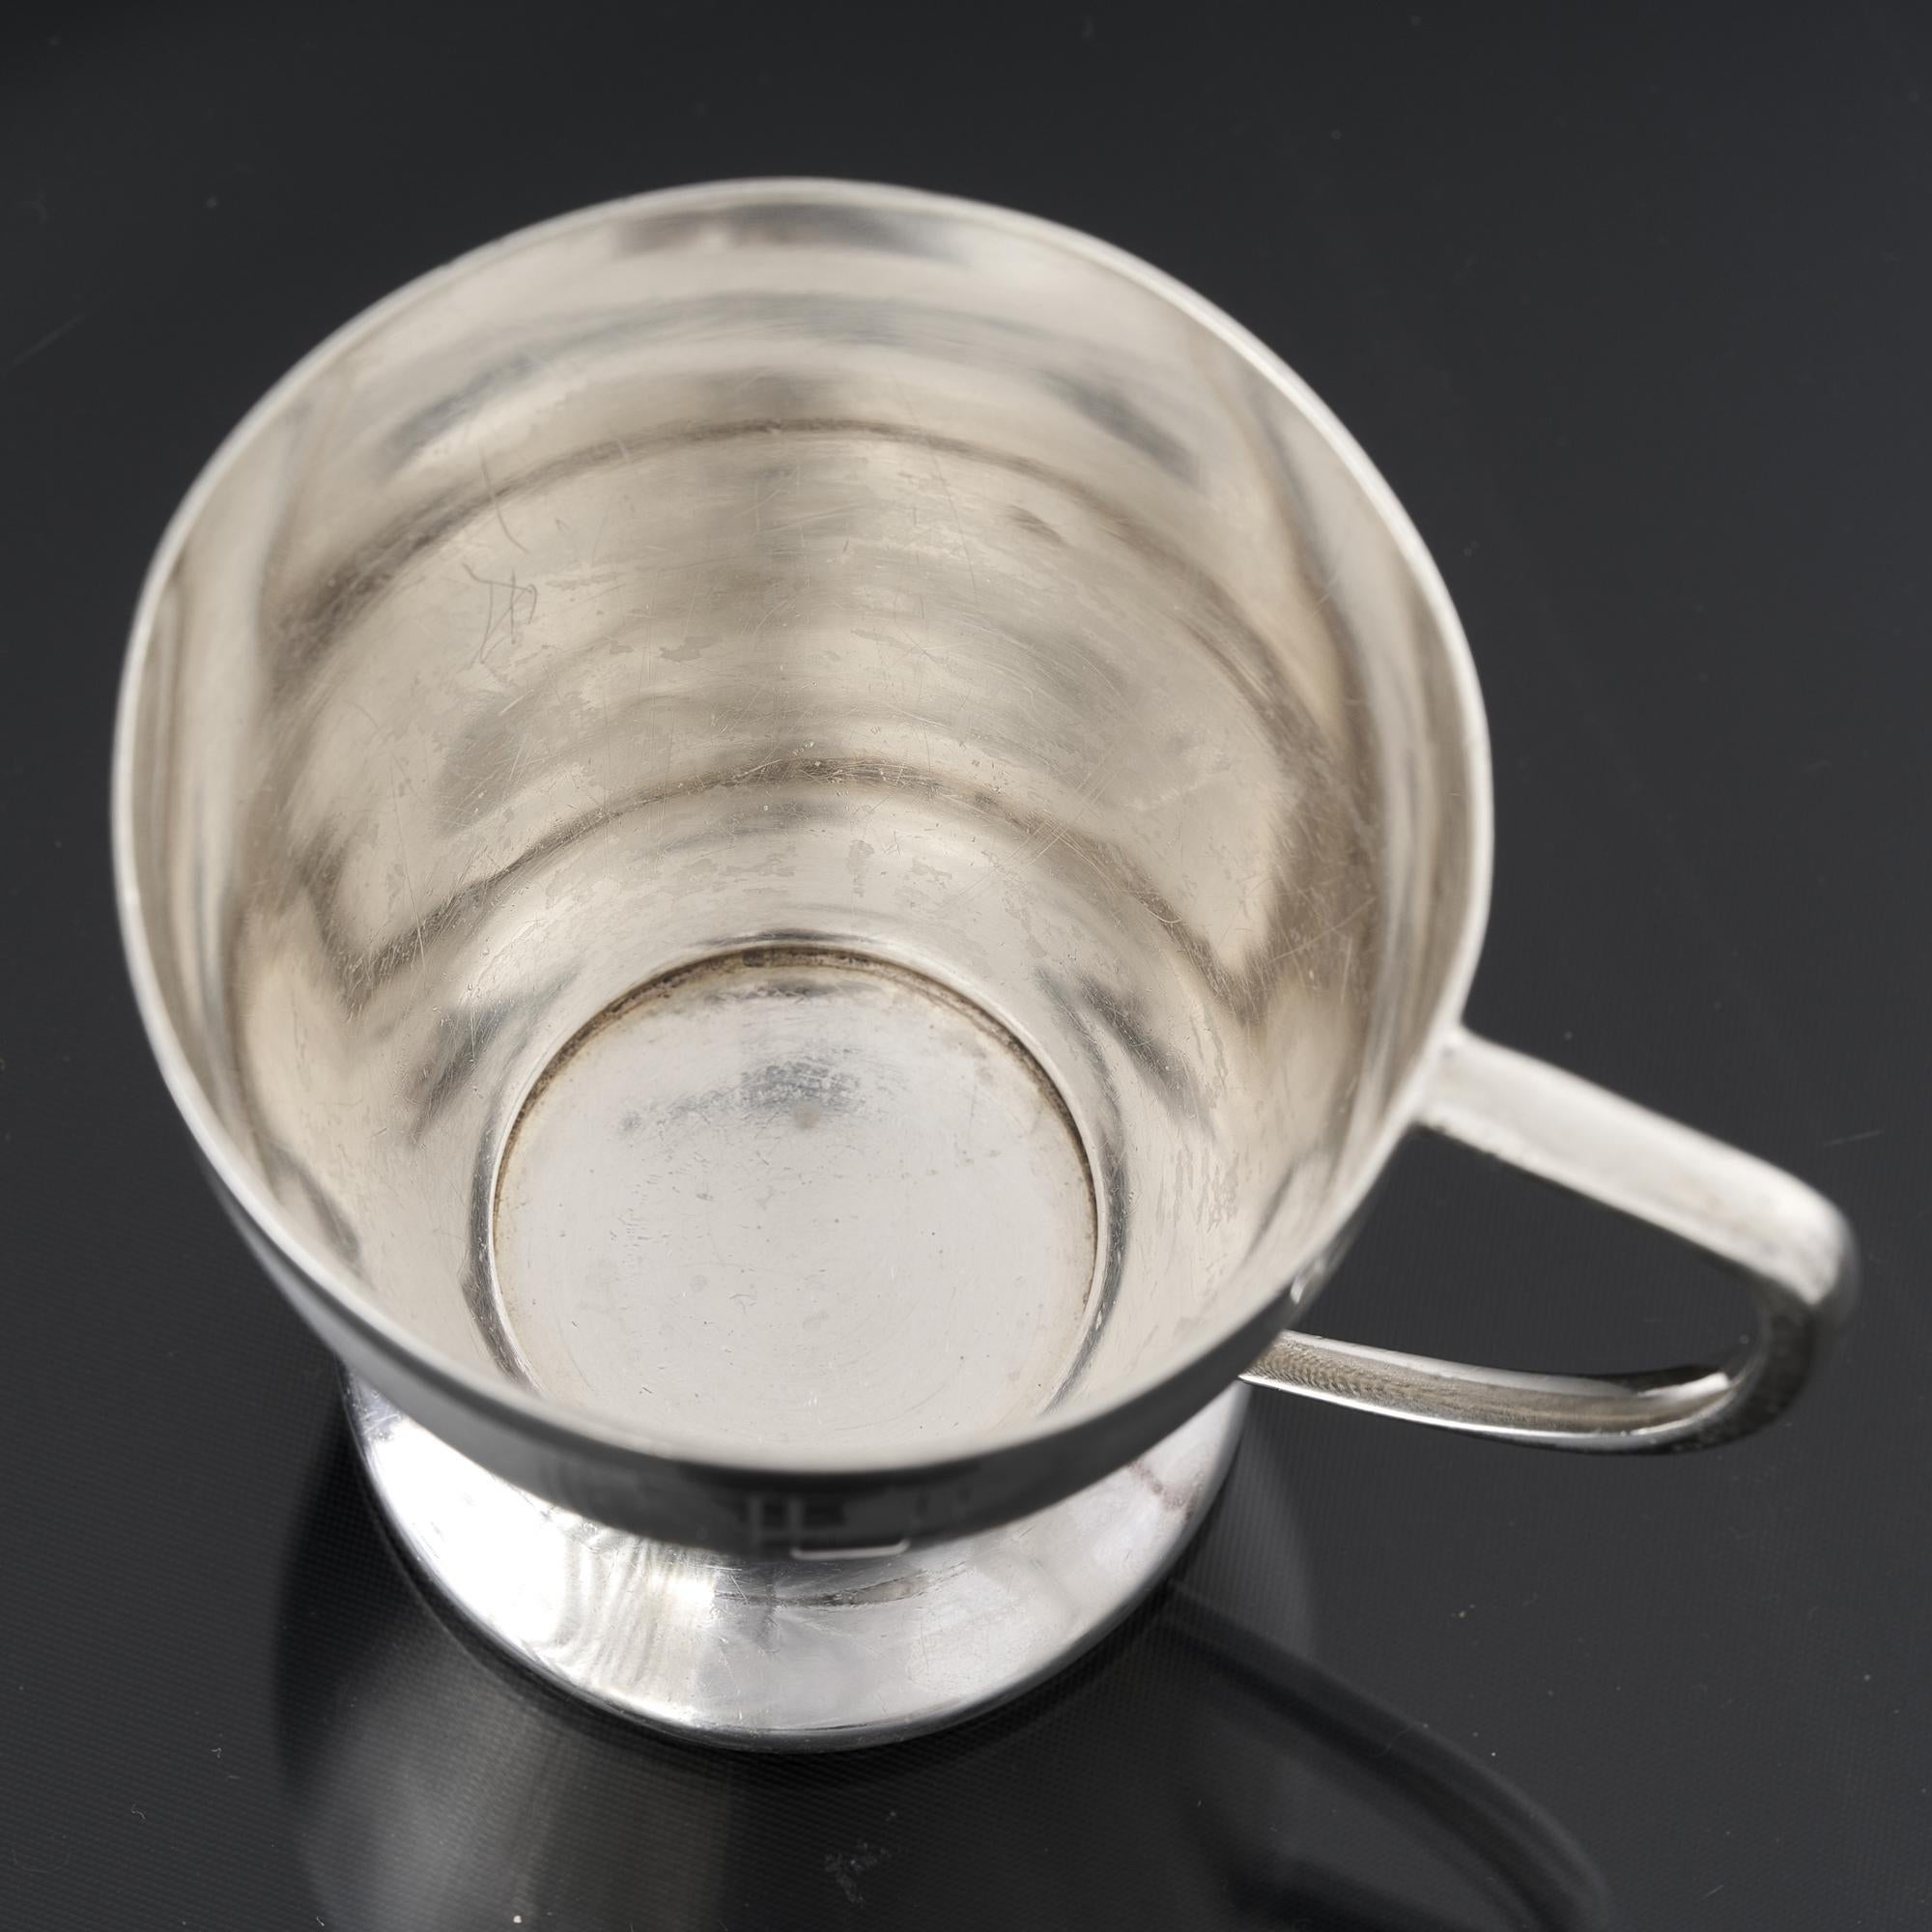 Art Deco style silver child's cup featuring a smart engine turned decoration to the body and plain border lip. The hand engraved, stepped, Art Deco motifs drop down from the lip and the cup and the simple handle is comfortable to hold.

Art Deco was